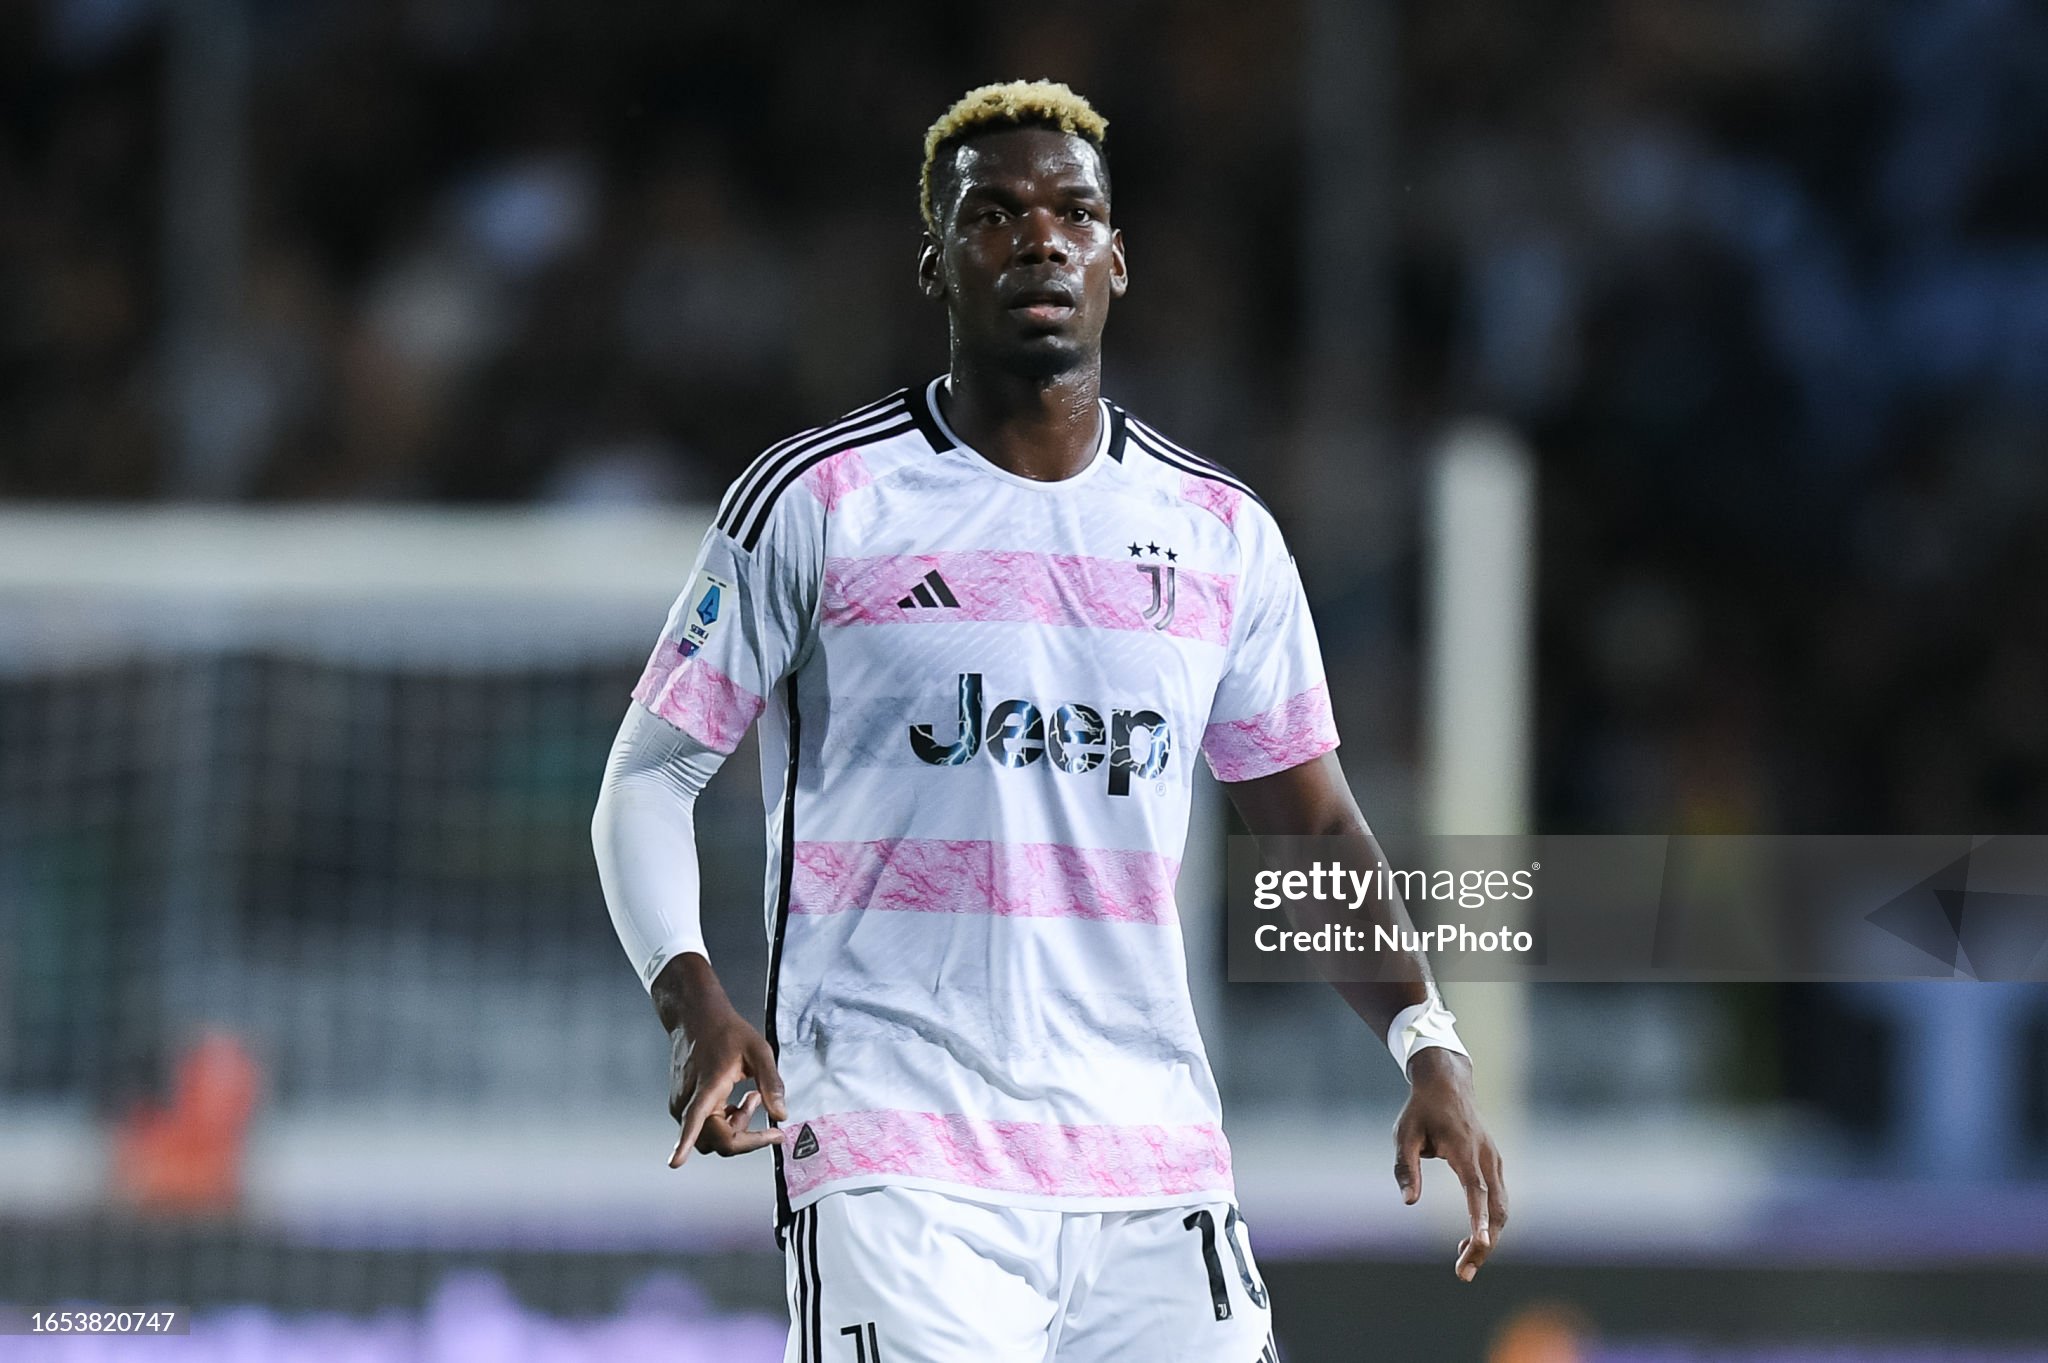 Juventus is done with Pogba: definitive break imminent